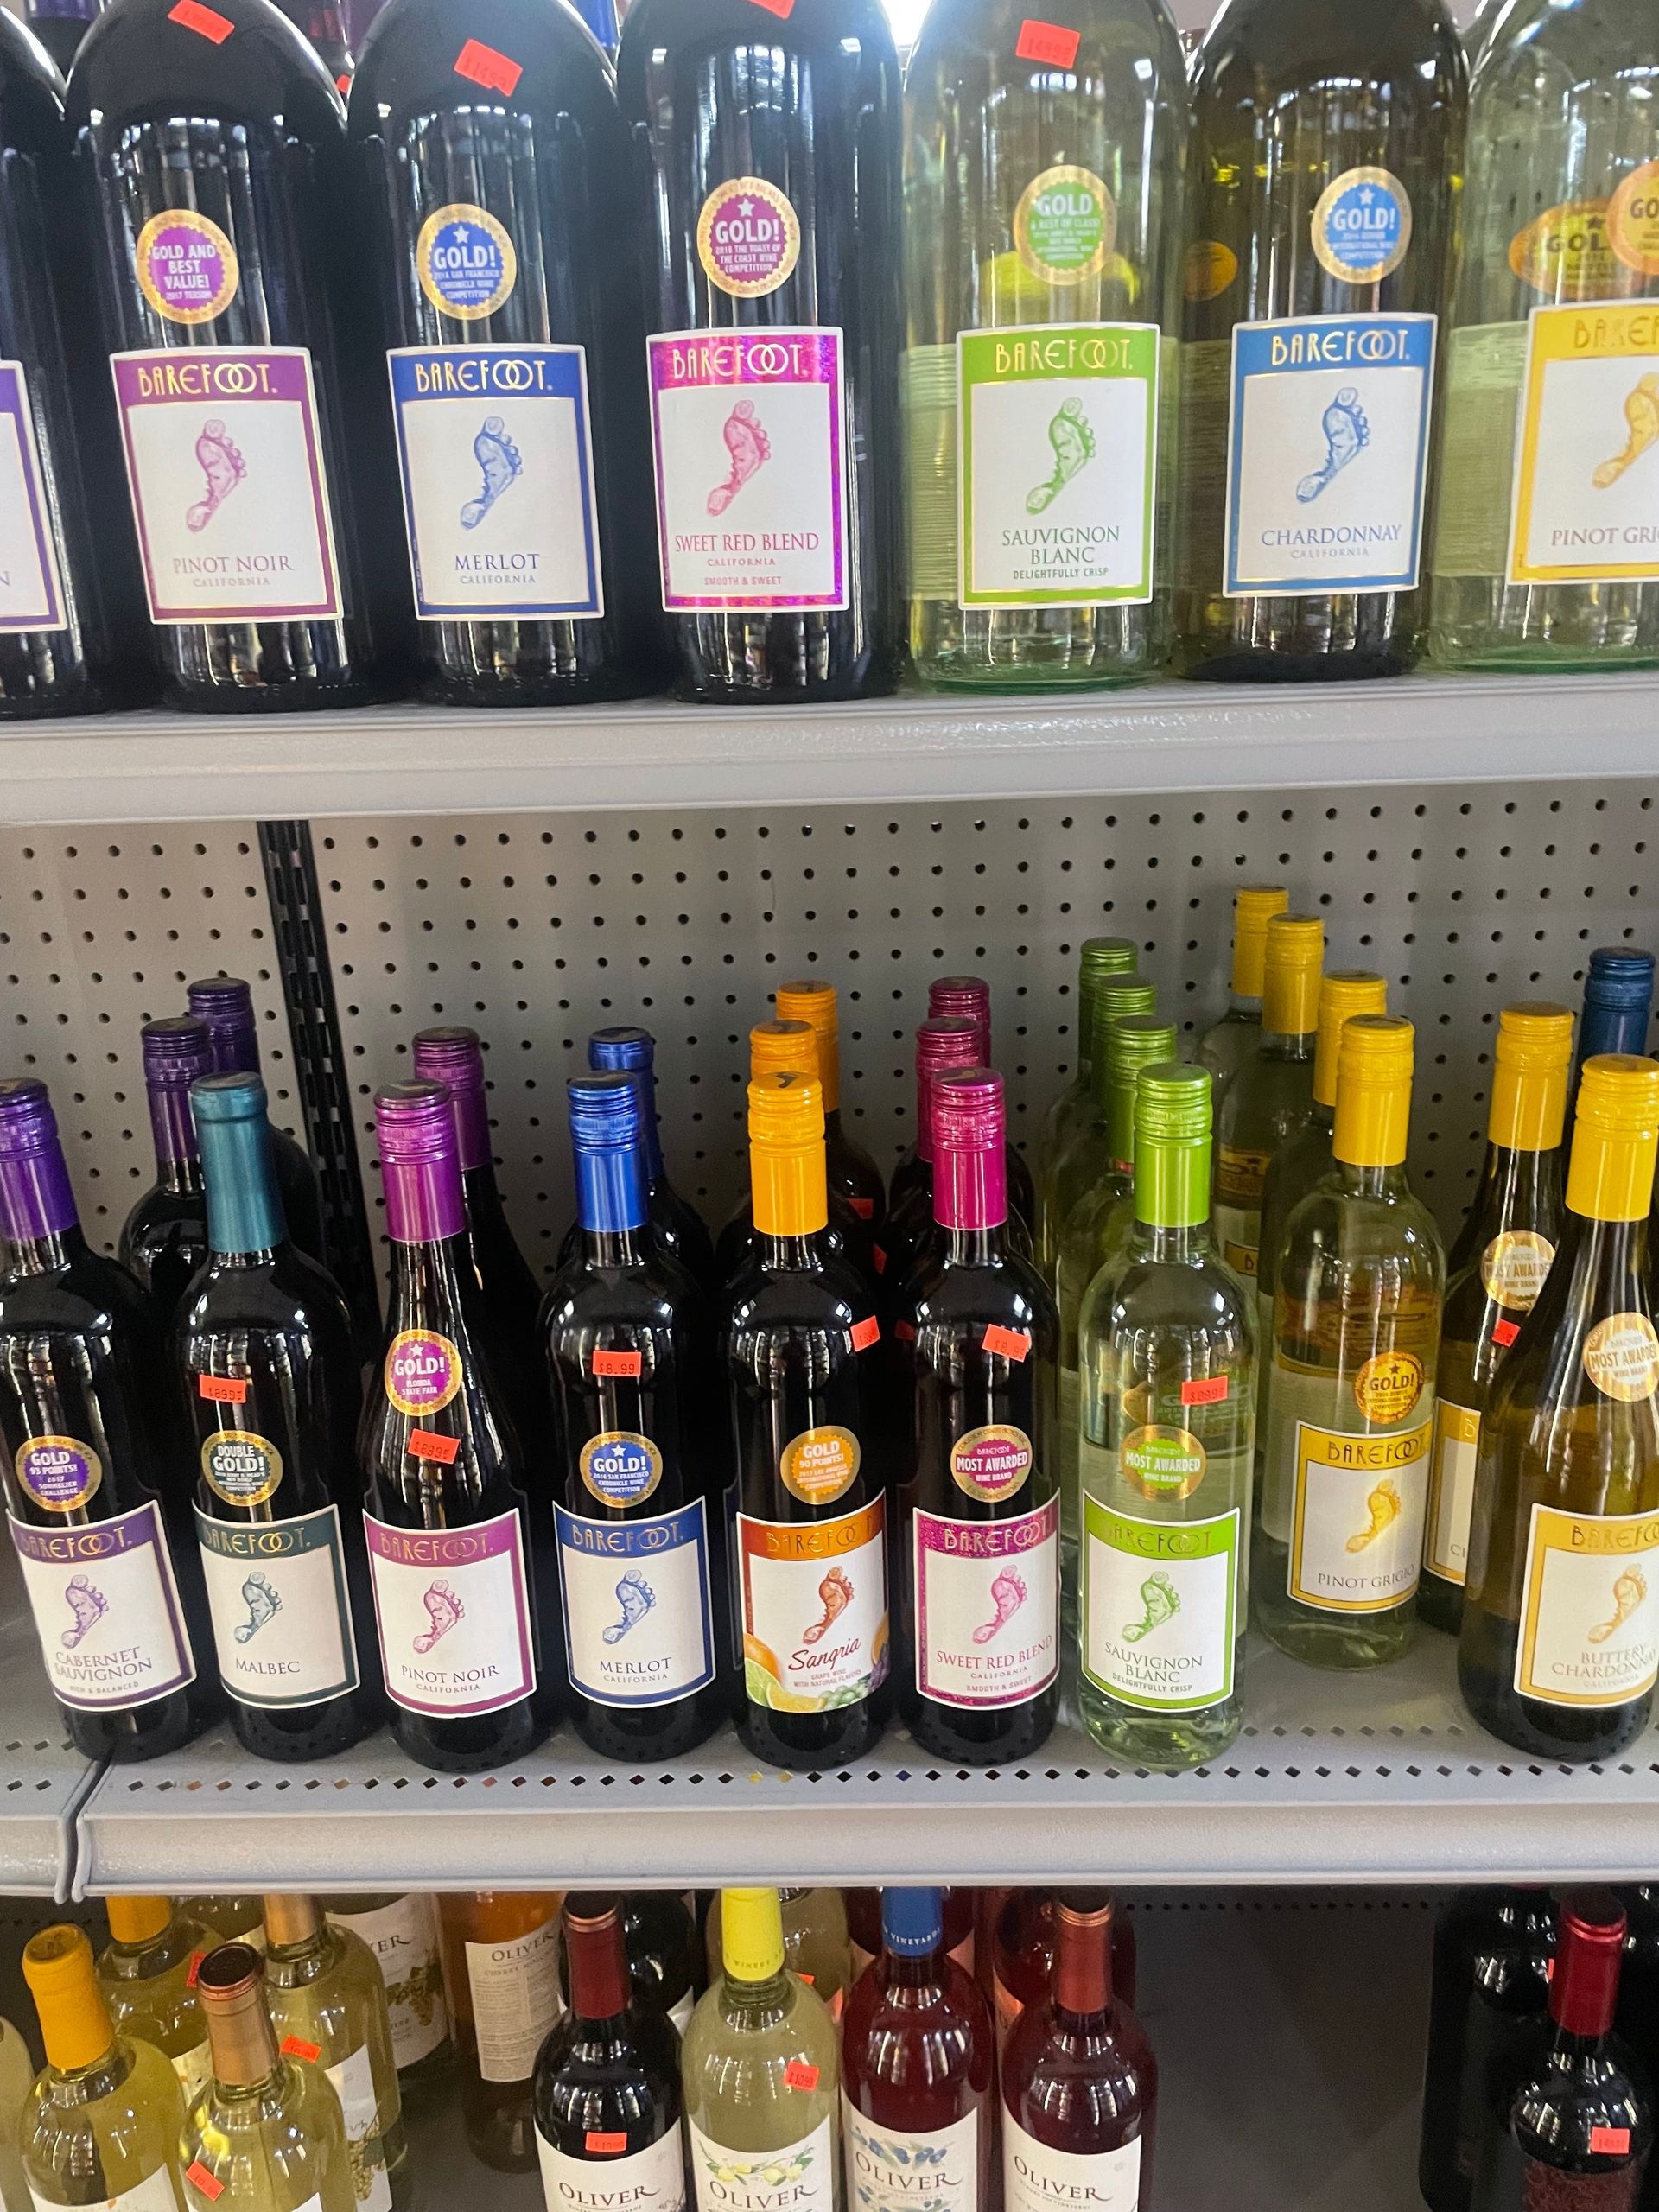 Several Bottles of Barefoot Wine Are Lined up On a Shelf